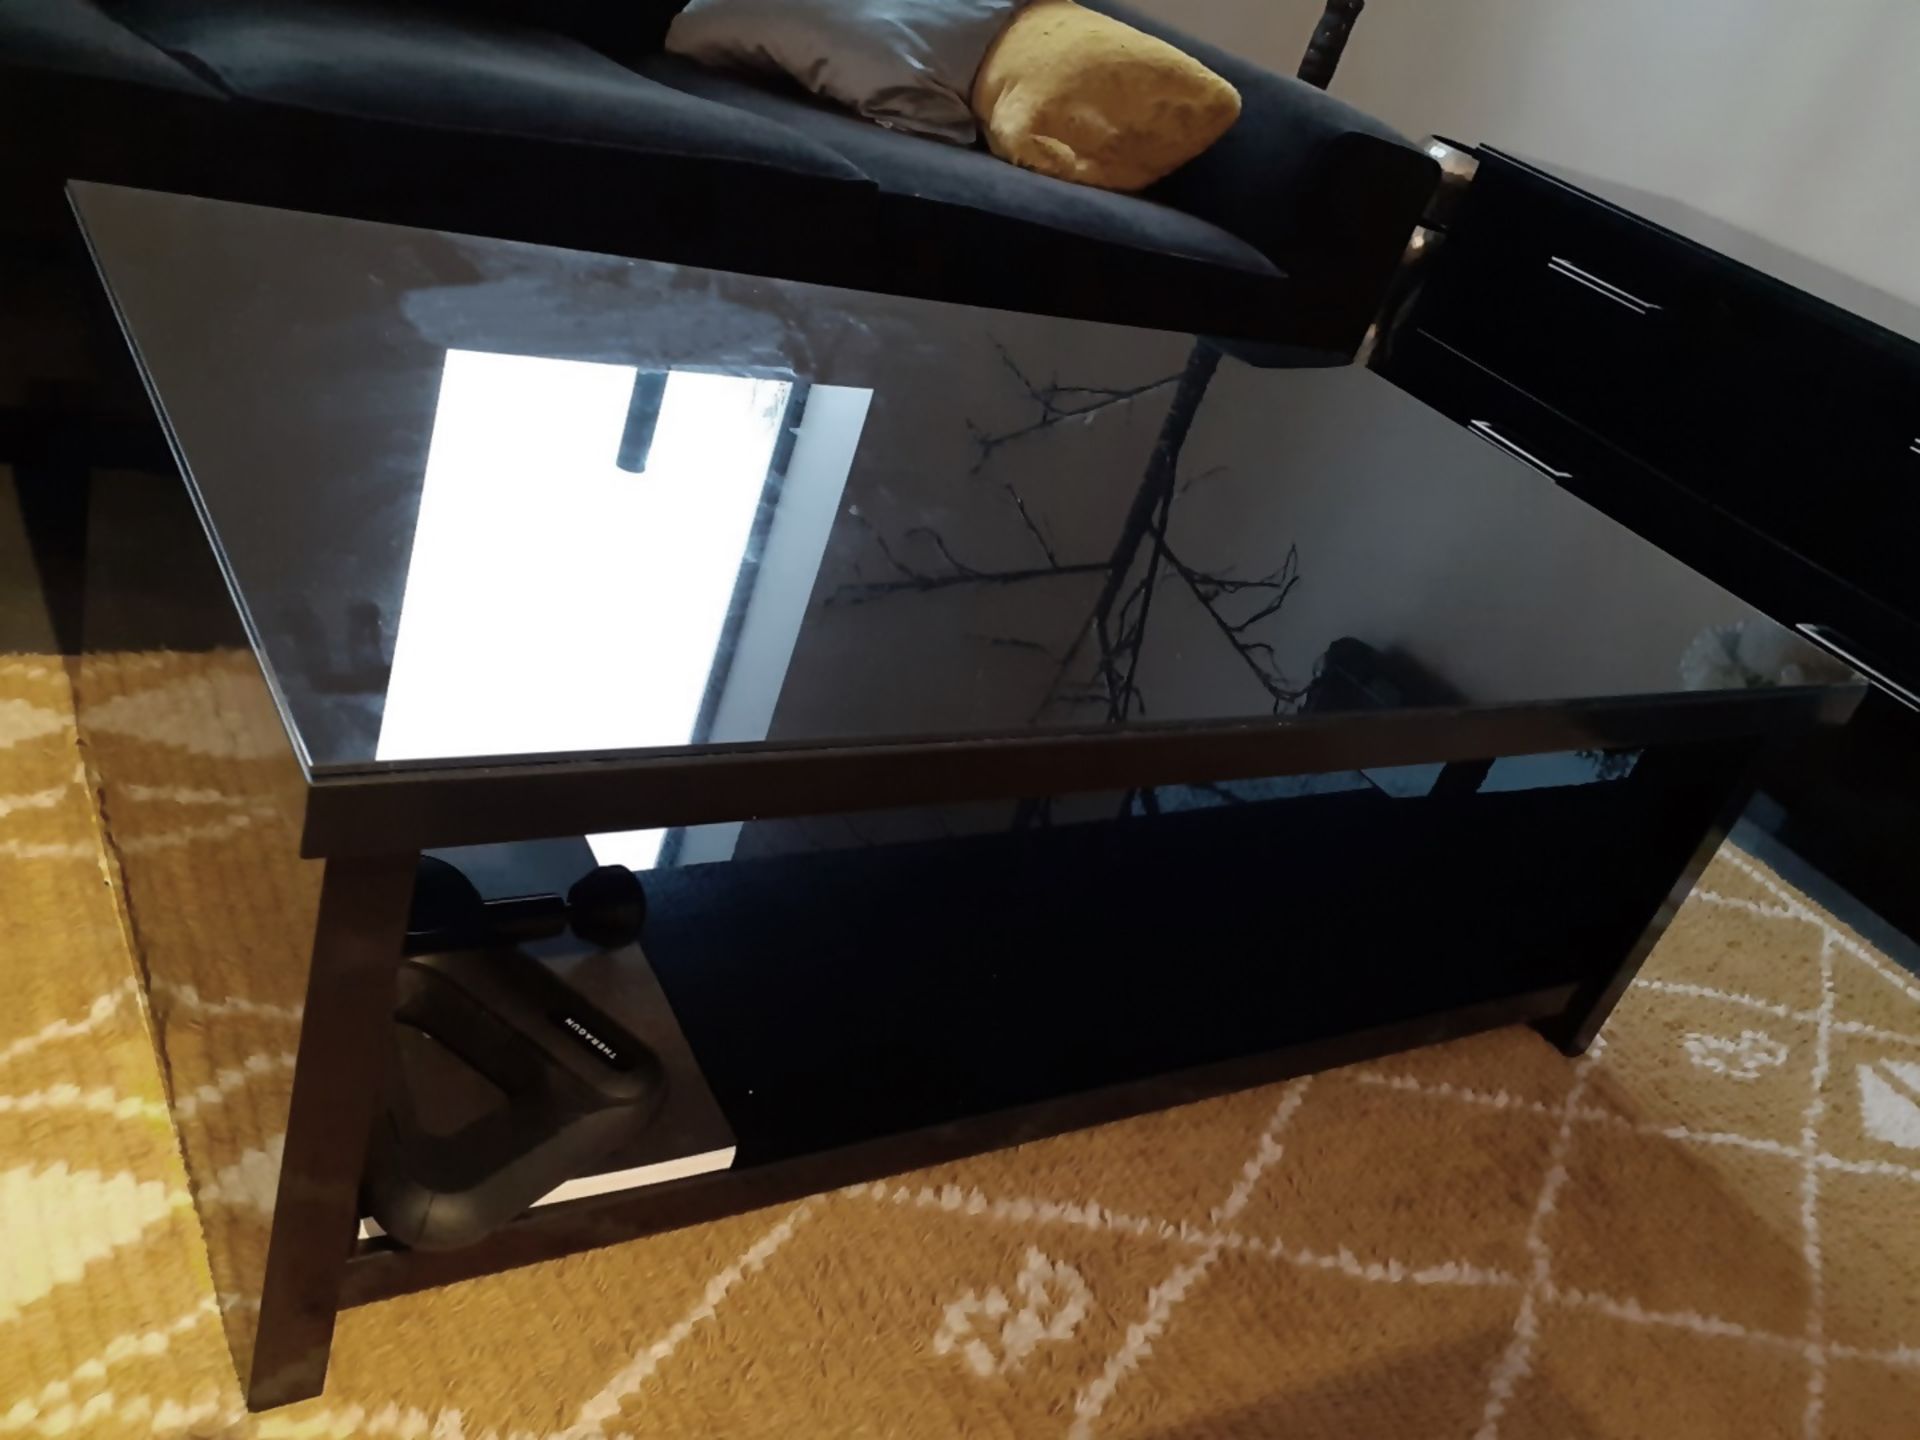 1 x Glass Topped Coffee Table With A Black Gloss Finish - Dimensions: 120 x 65 x H42cm - NO VAT - Image 4 of 5